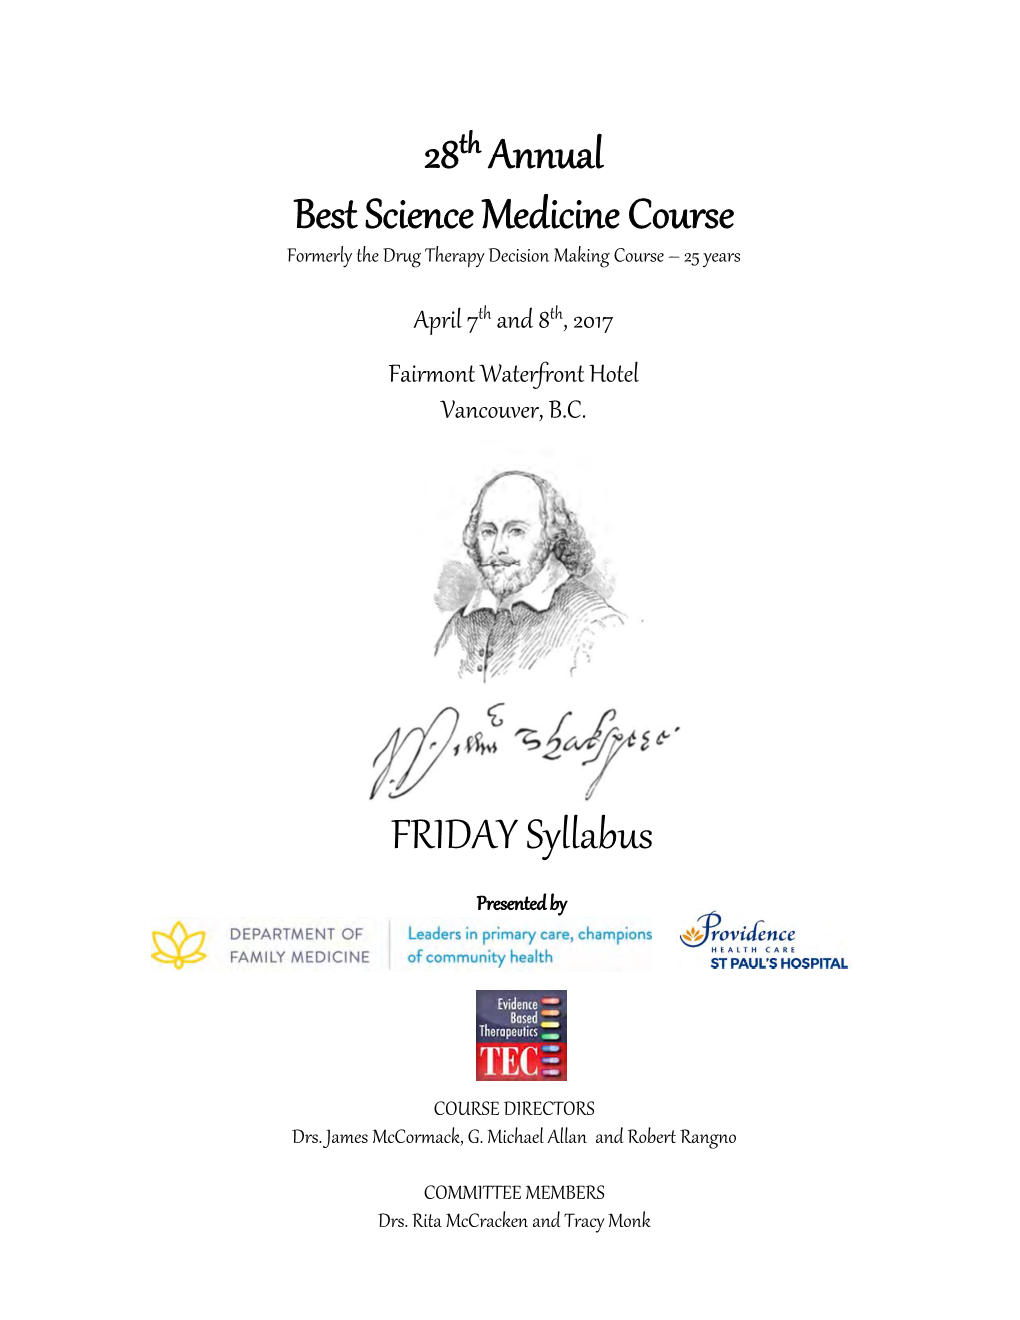 FRIDAY Syllabus 28Th Annual Best Science Medicine Course